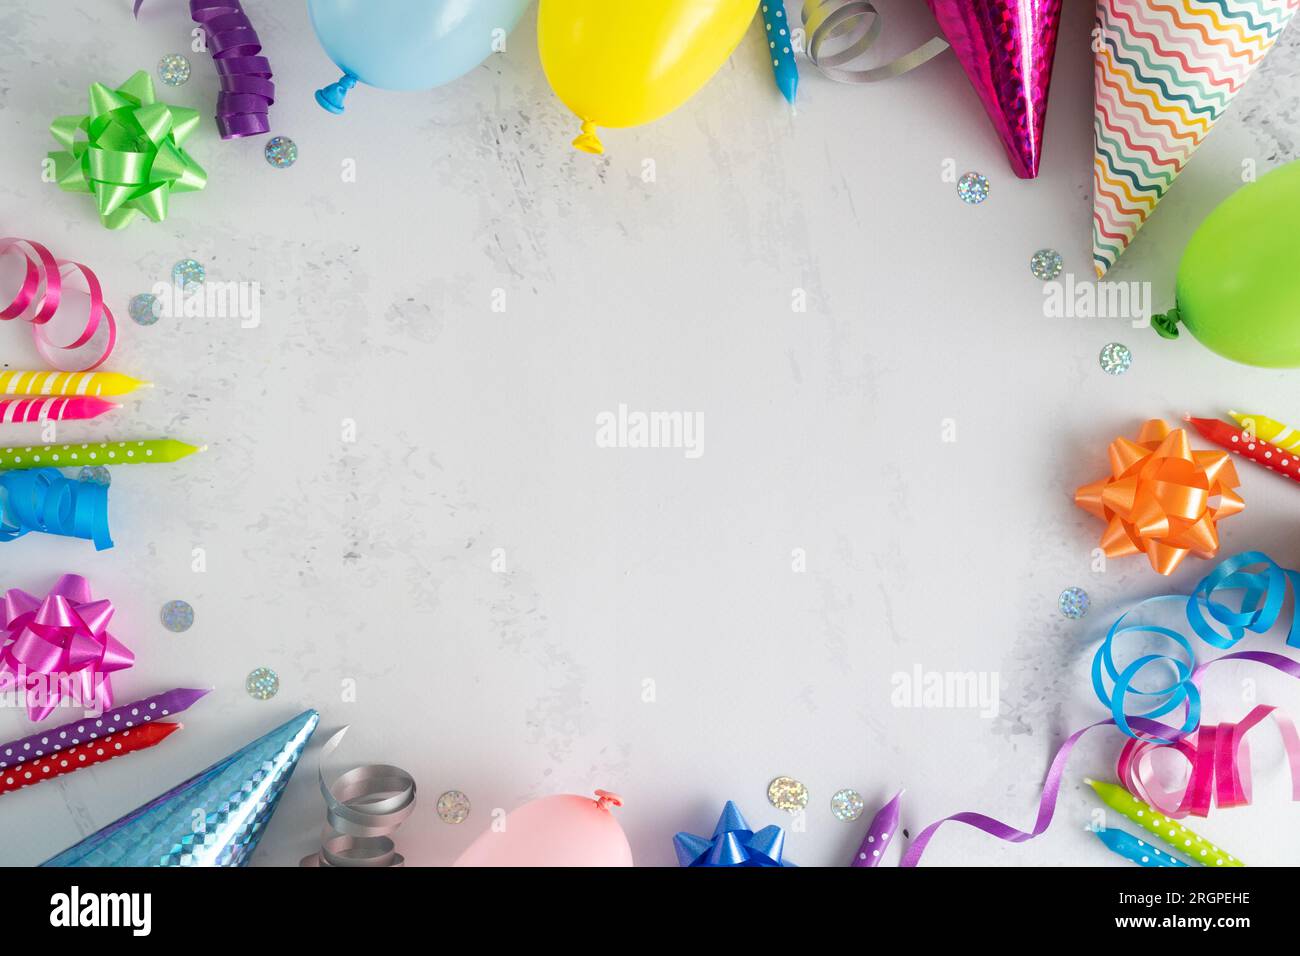 Birthday party flat lay composition frame. Colorful balloons, cake candles, cone hats, bows, ribbons decorations. Invitation concept with copy space. Stock Photo